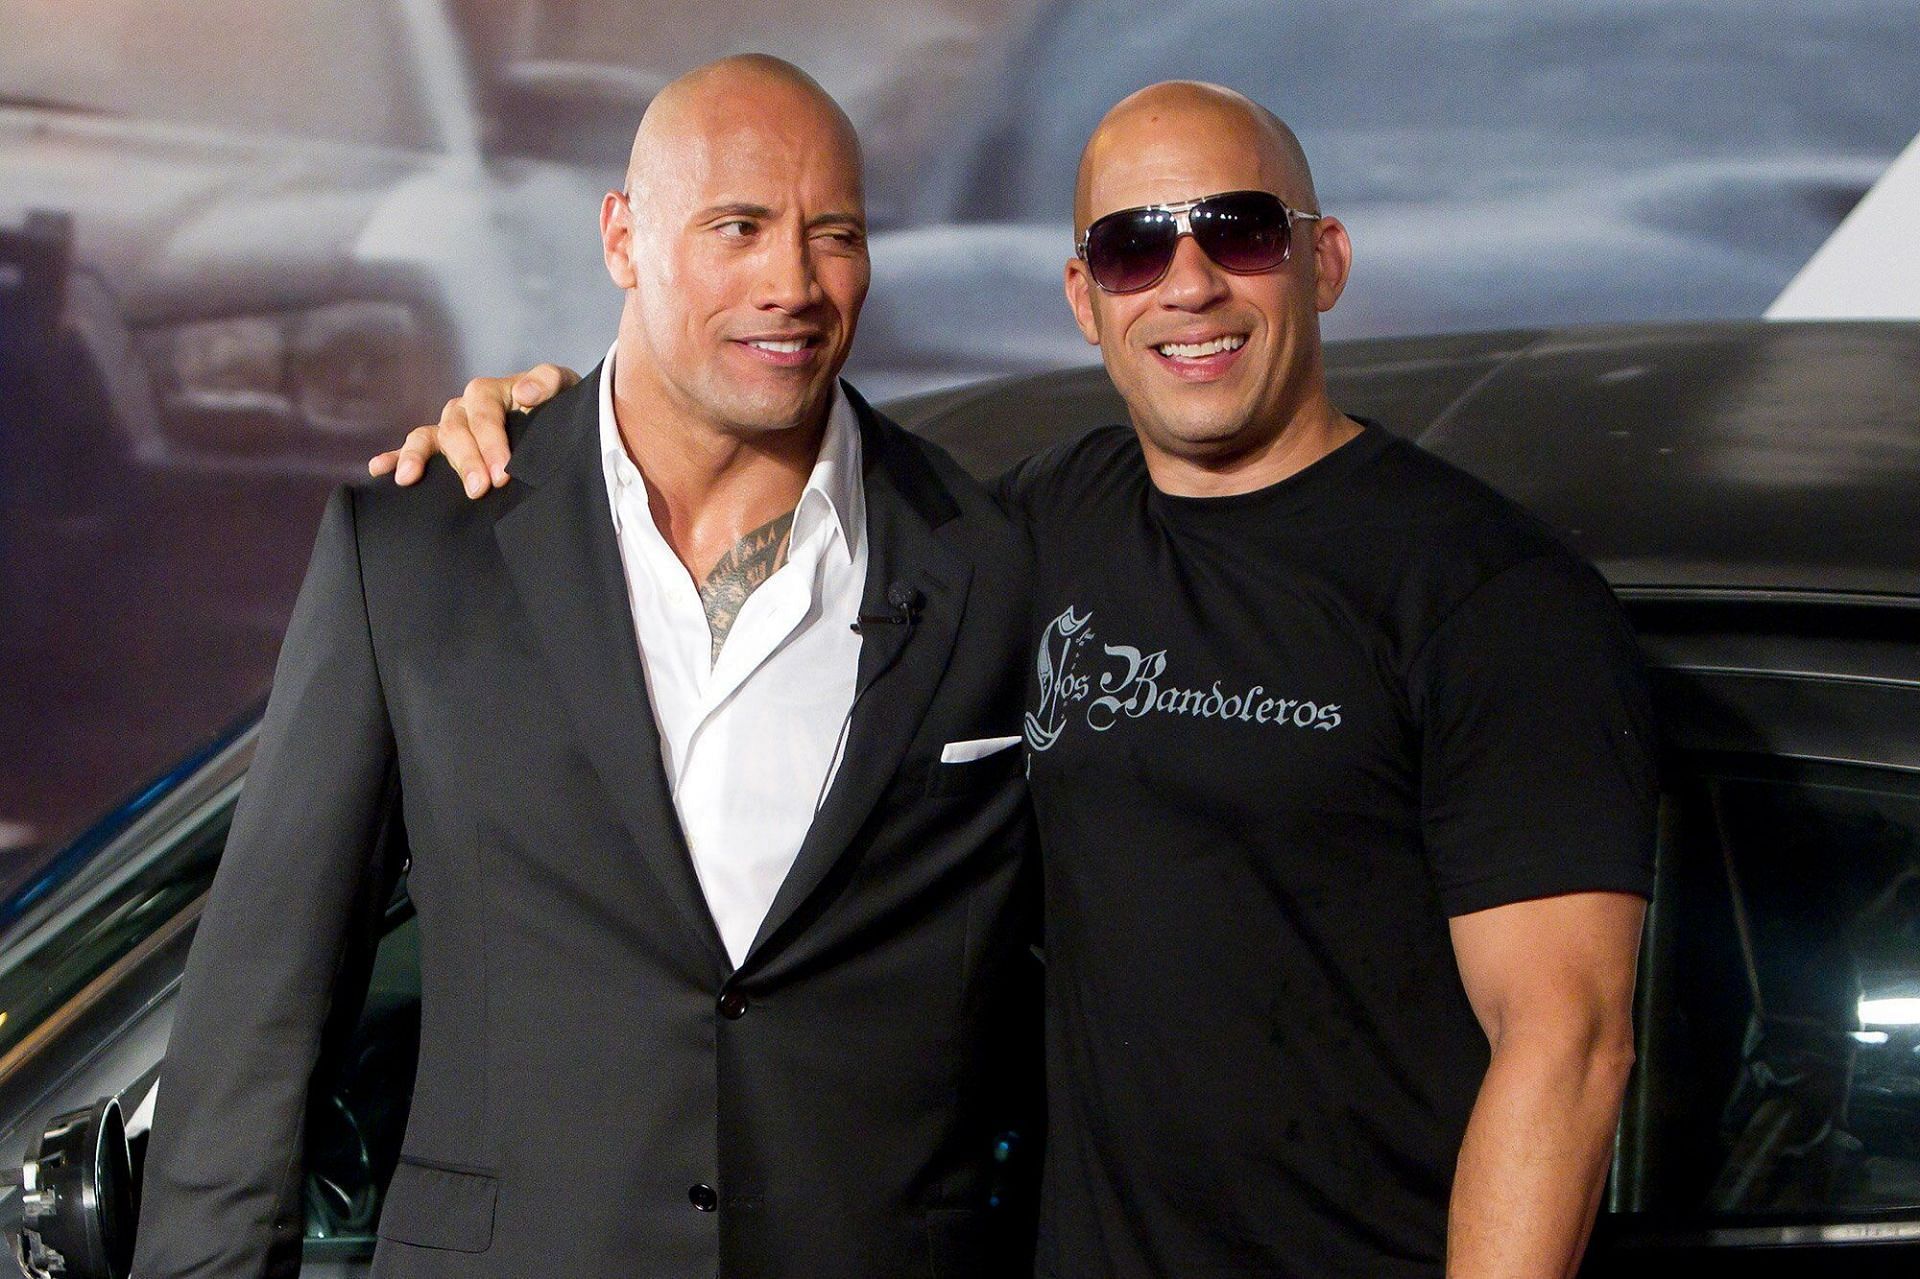 Dwayne Johnson and Vin Diesel have co-starred together for Fast &amp; Furious